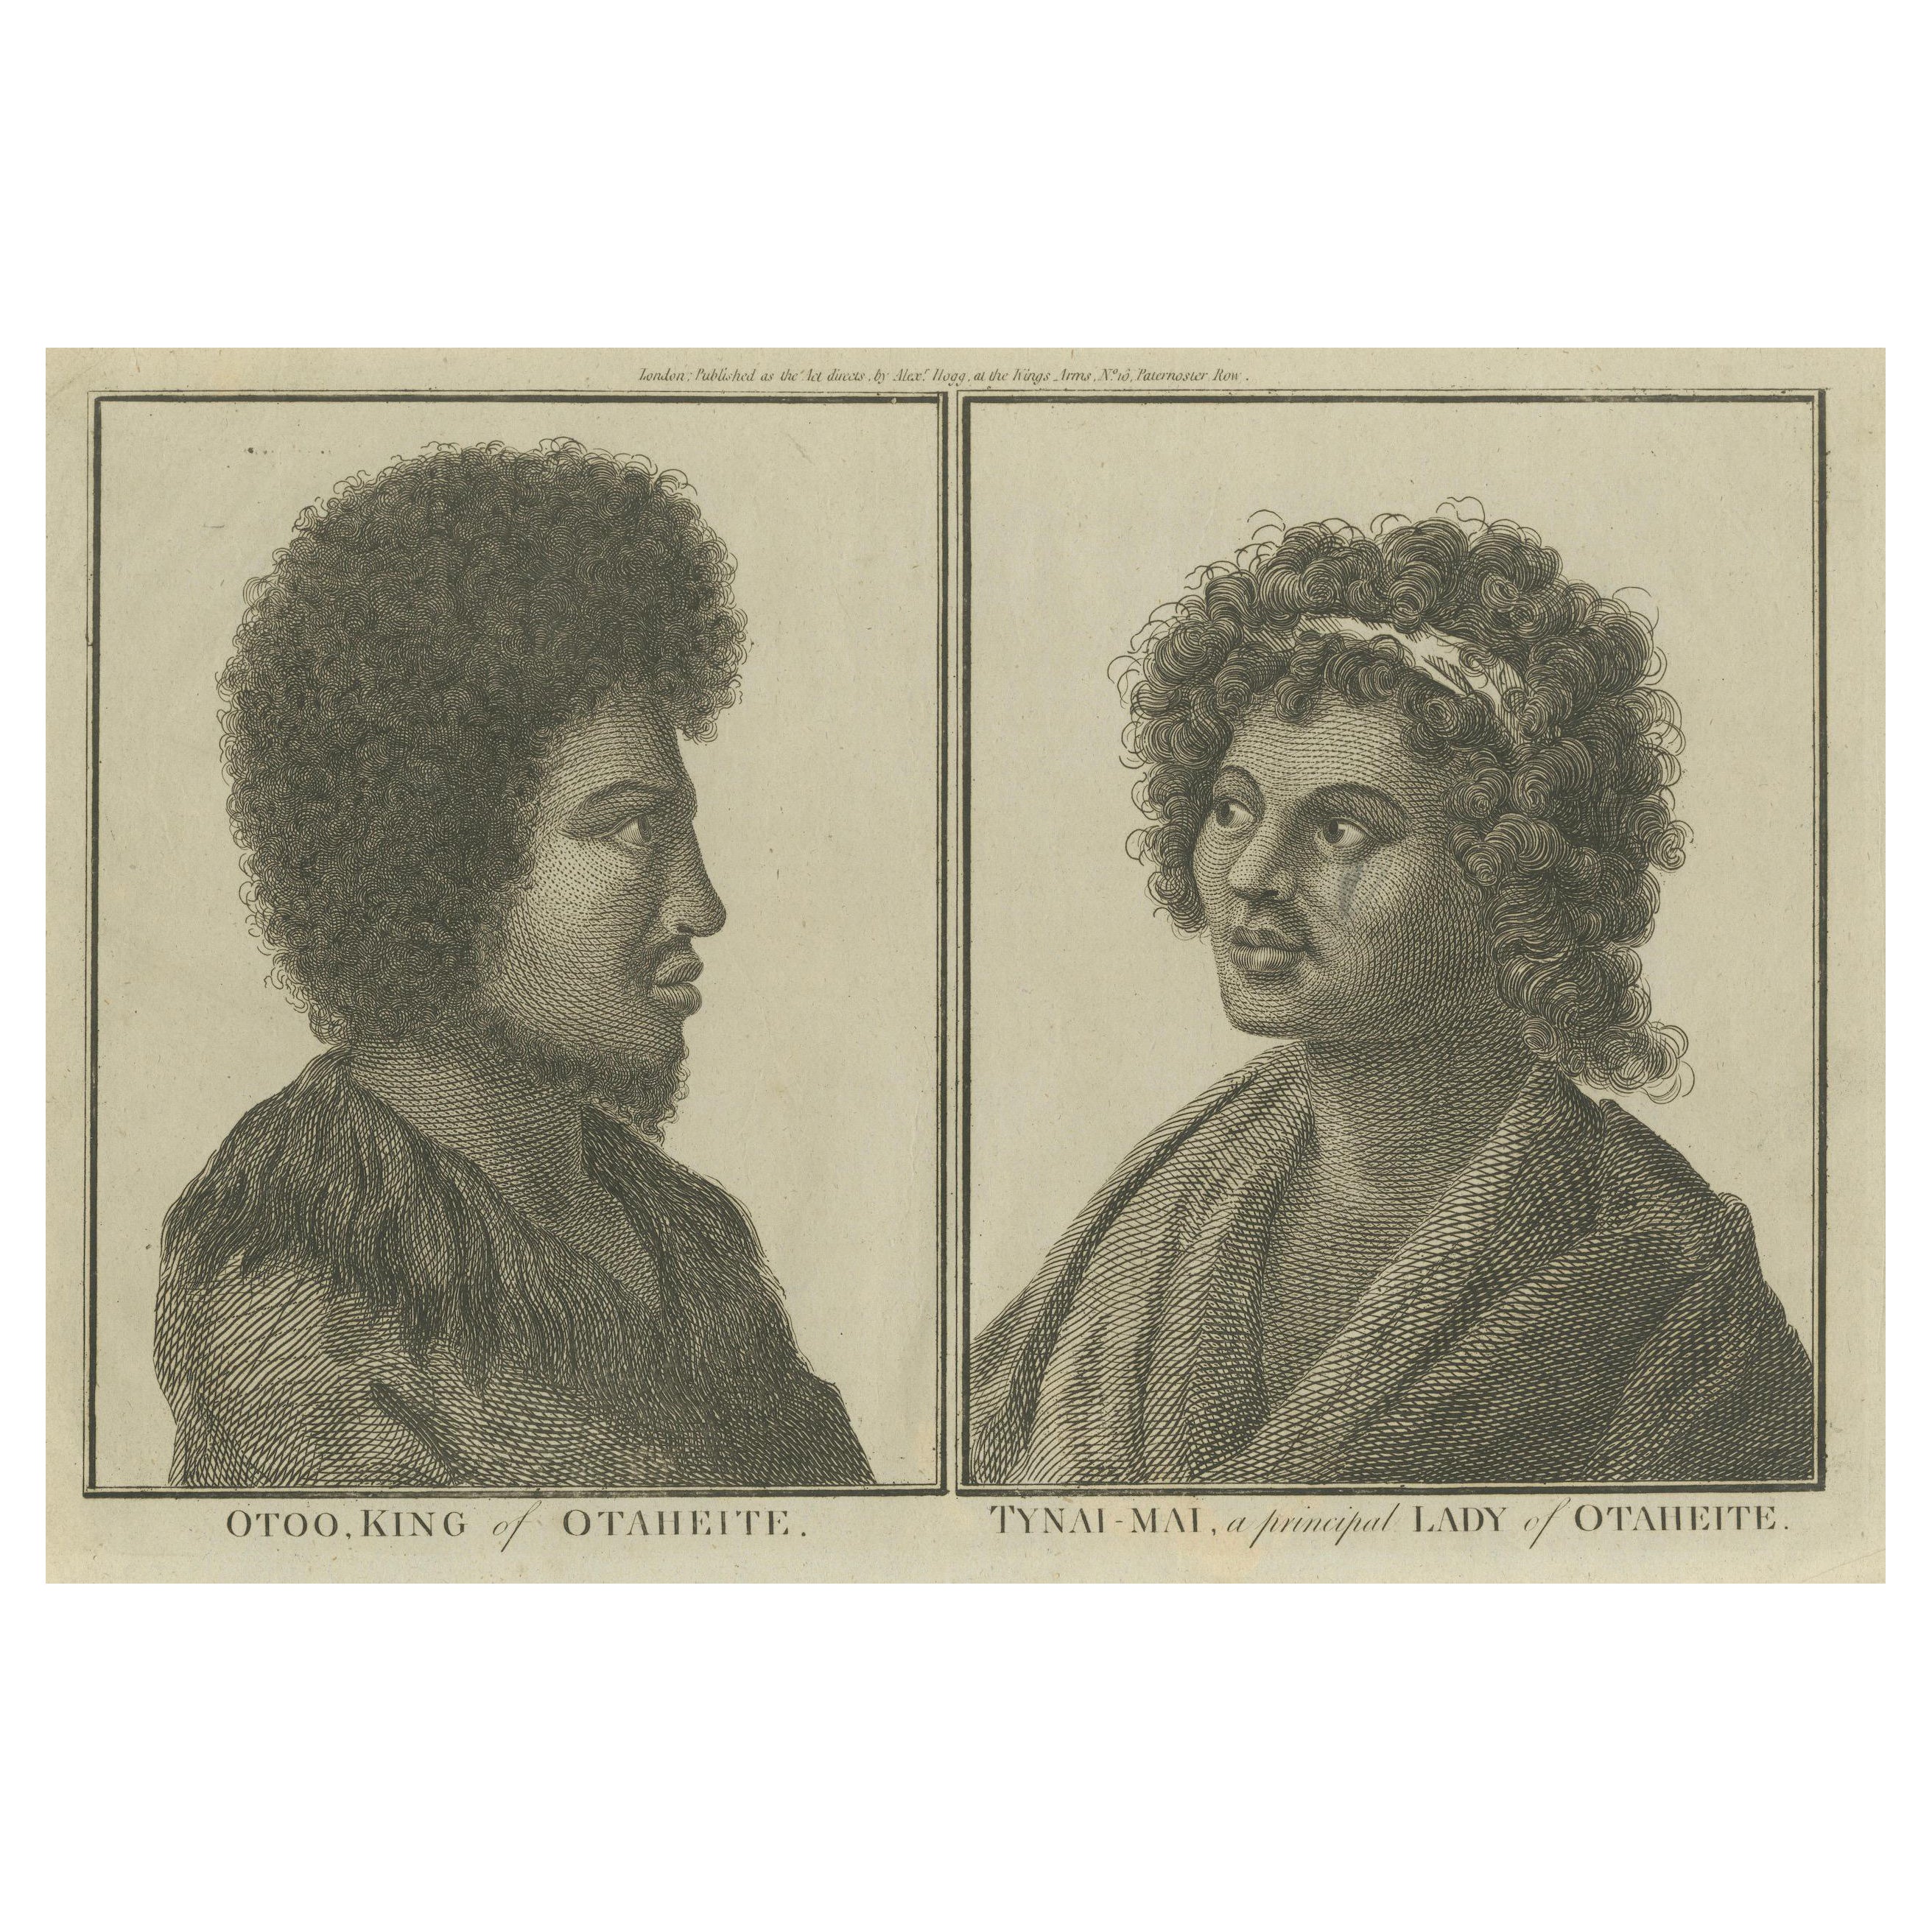 Sovereign Profiles: King Otoo and Lady Tynai-Mai of Tahiti, Published in ca.1785